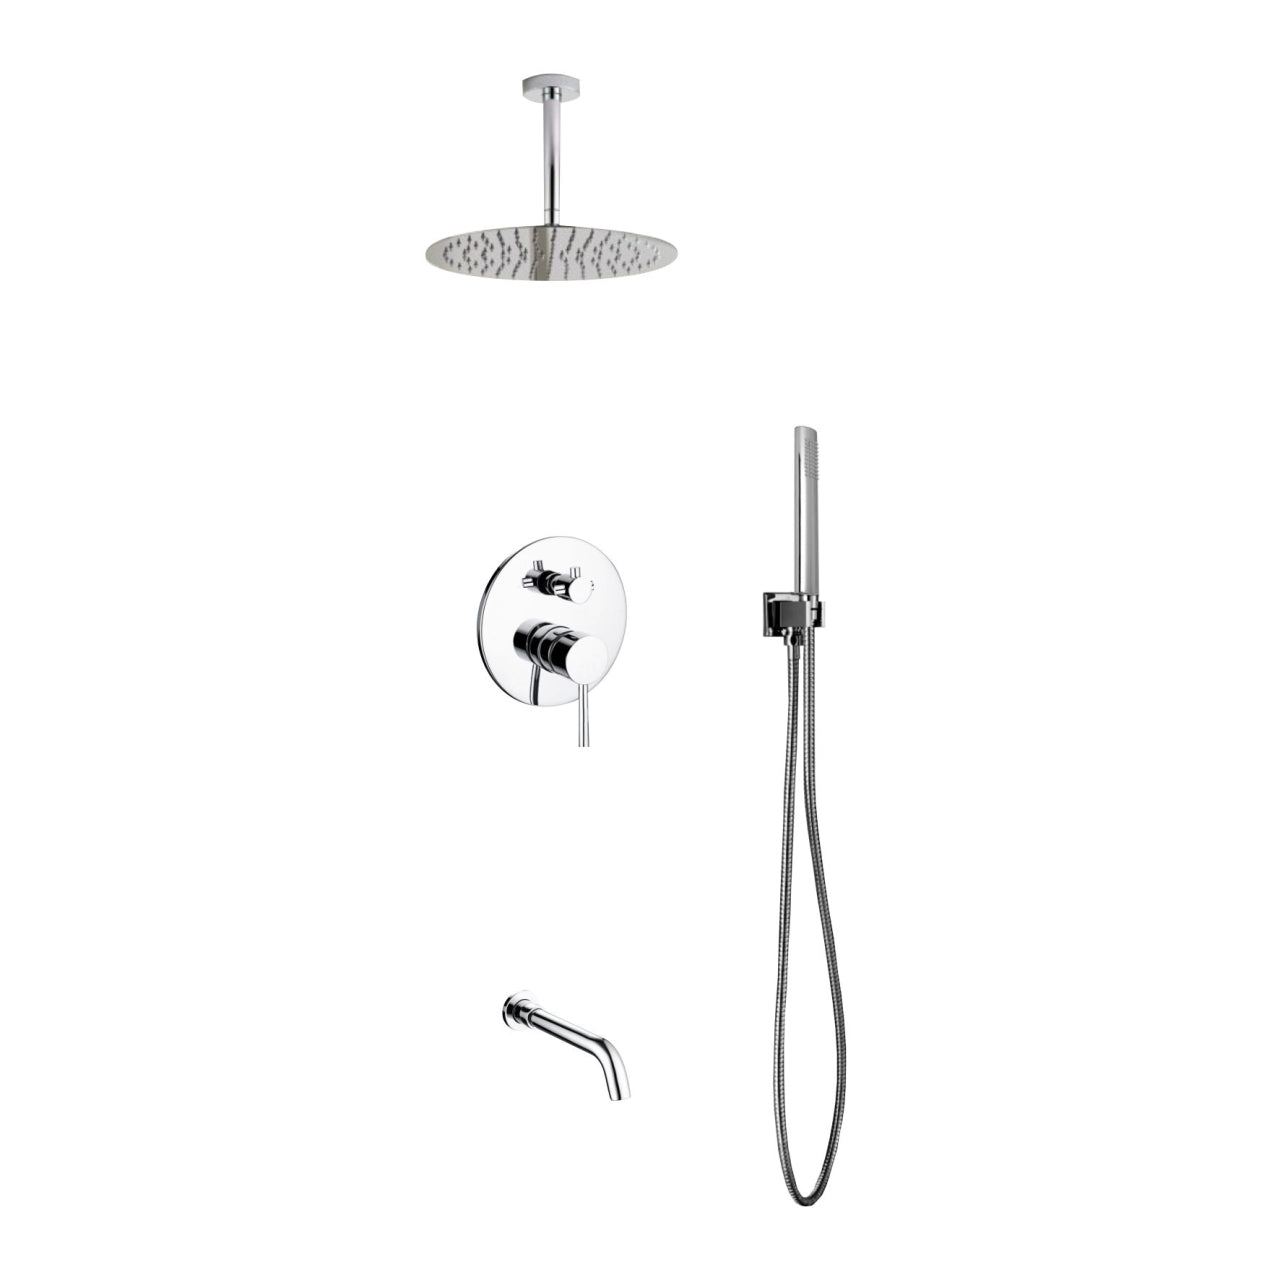 Aqua Rondo Brass Shower Set With Ceiling Mount Round Rain Shower (Handheld and Tub Filler) - Home and Bath Depot